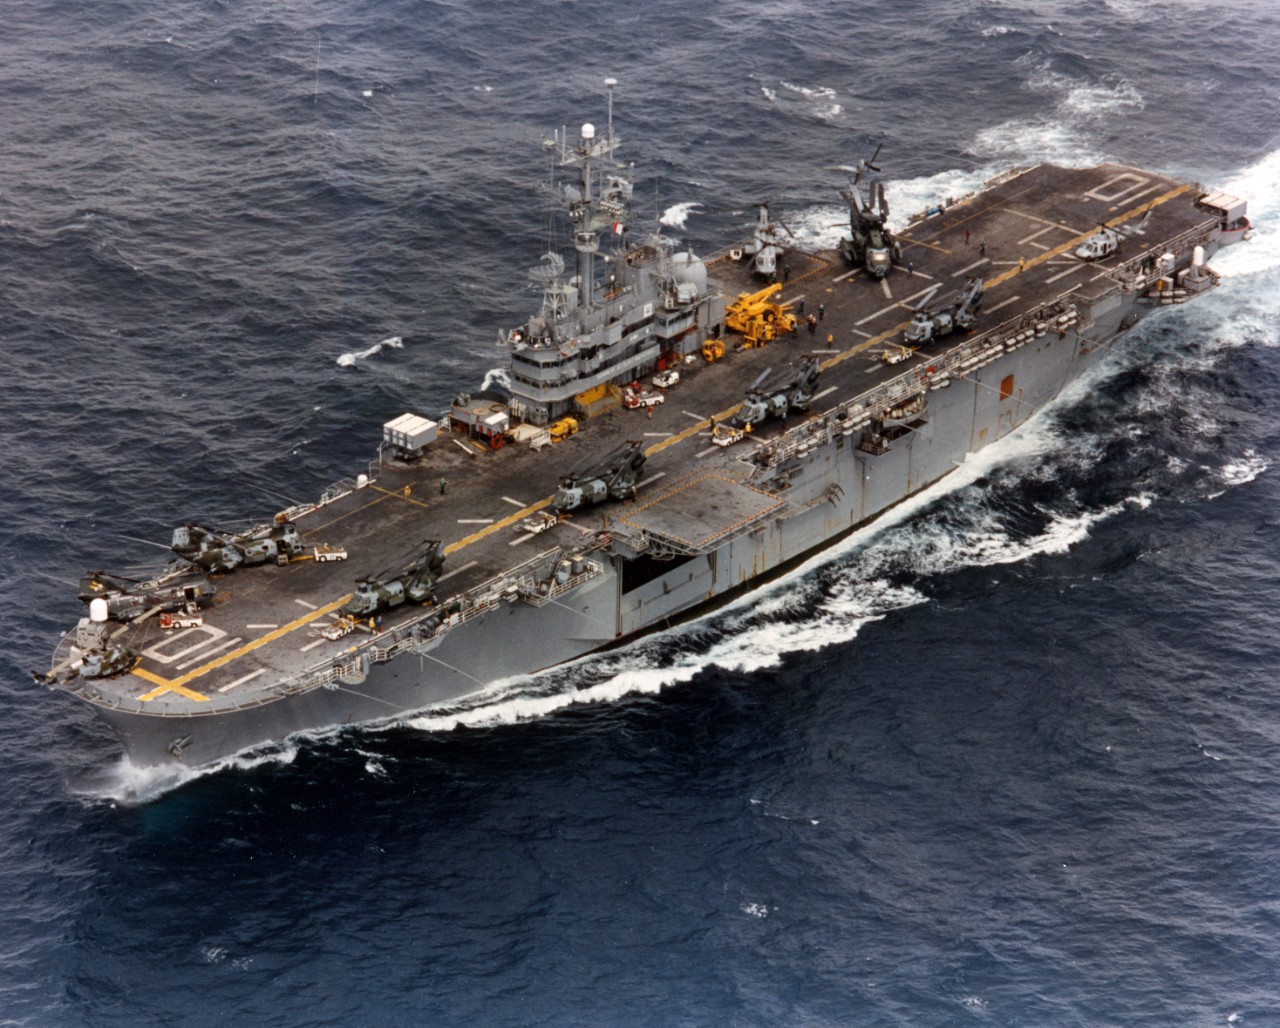 Aerial view of amphibious assault ship USS Tripoli (LPH-10) underway. There are a number of different helicopters on the flight deck, including MH-53E Seadragon, CH-46 Sea Knight, and Bell UH-1 types.